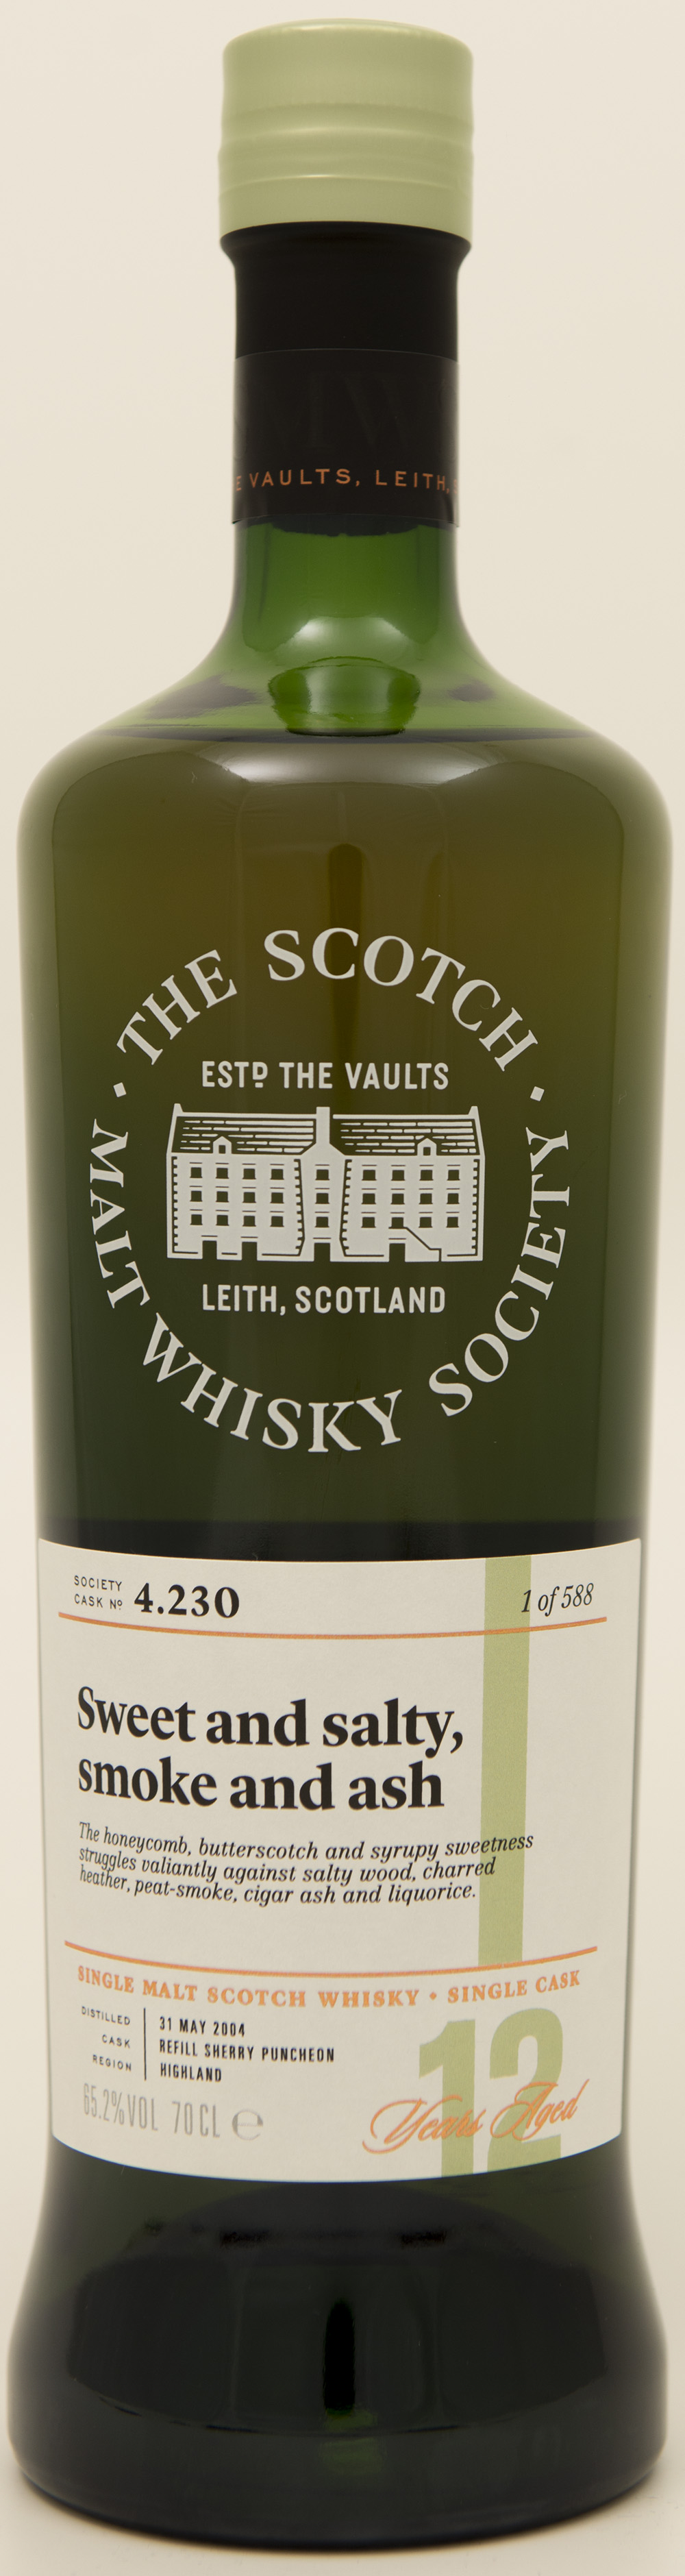 Billede: DSC_3665 - SMWS 4.230 - Sweet and salty, smoke and ash.jpg